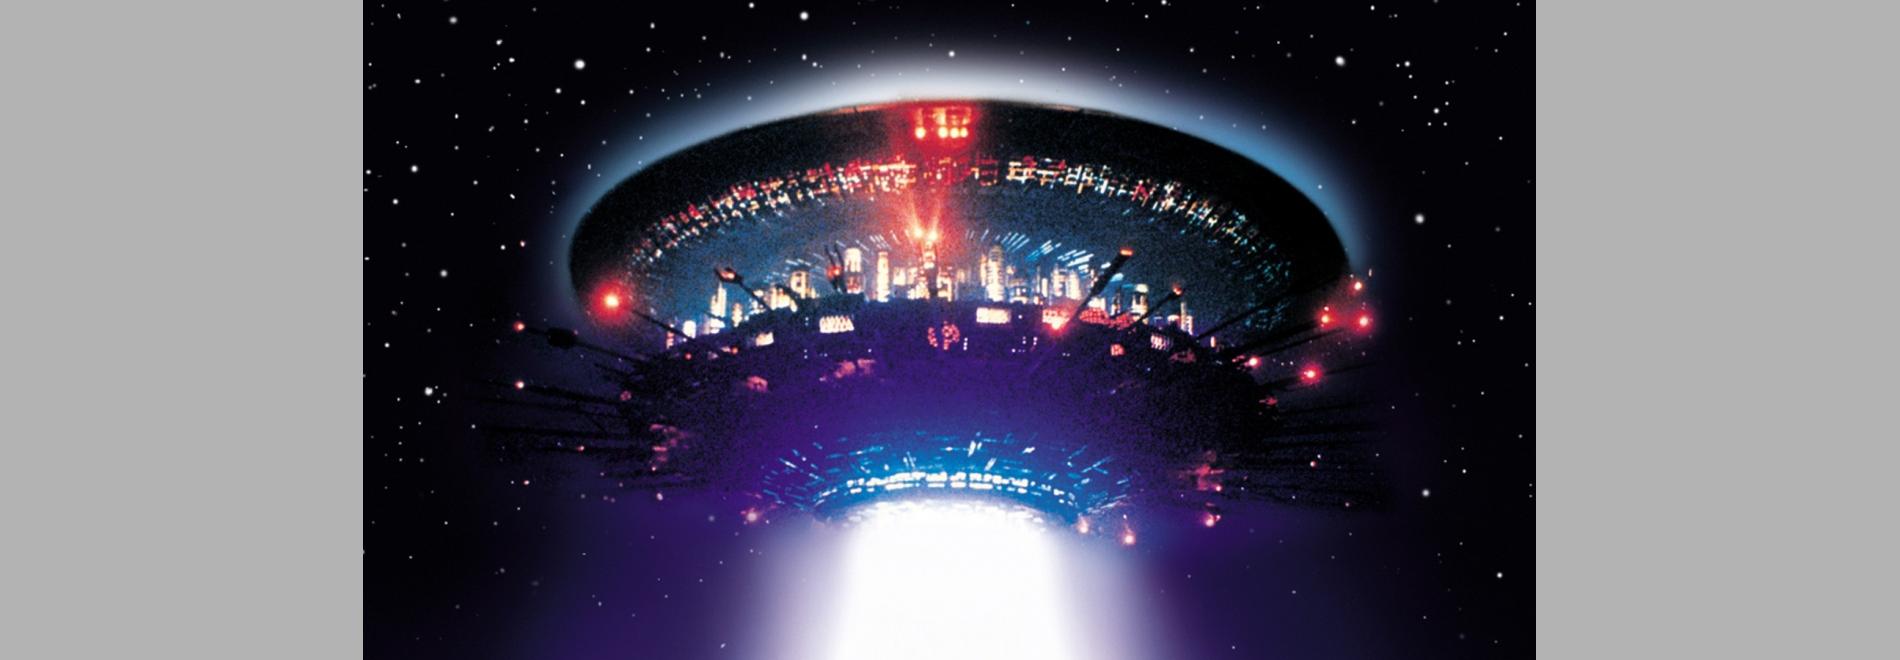 Close Encounters of the Third Kind (Steven Spielberg, 1977)